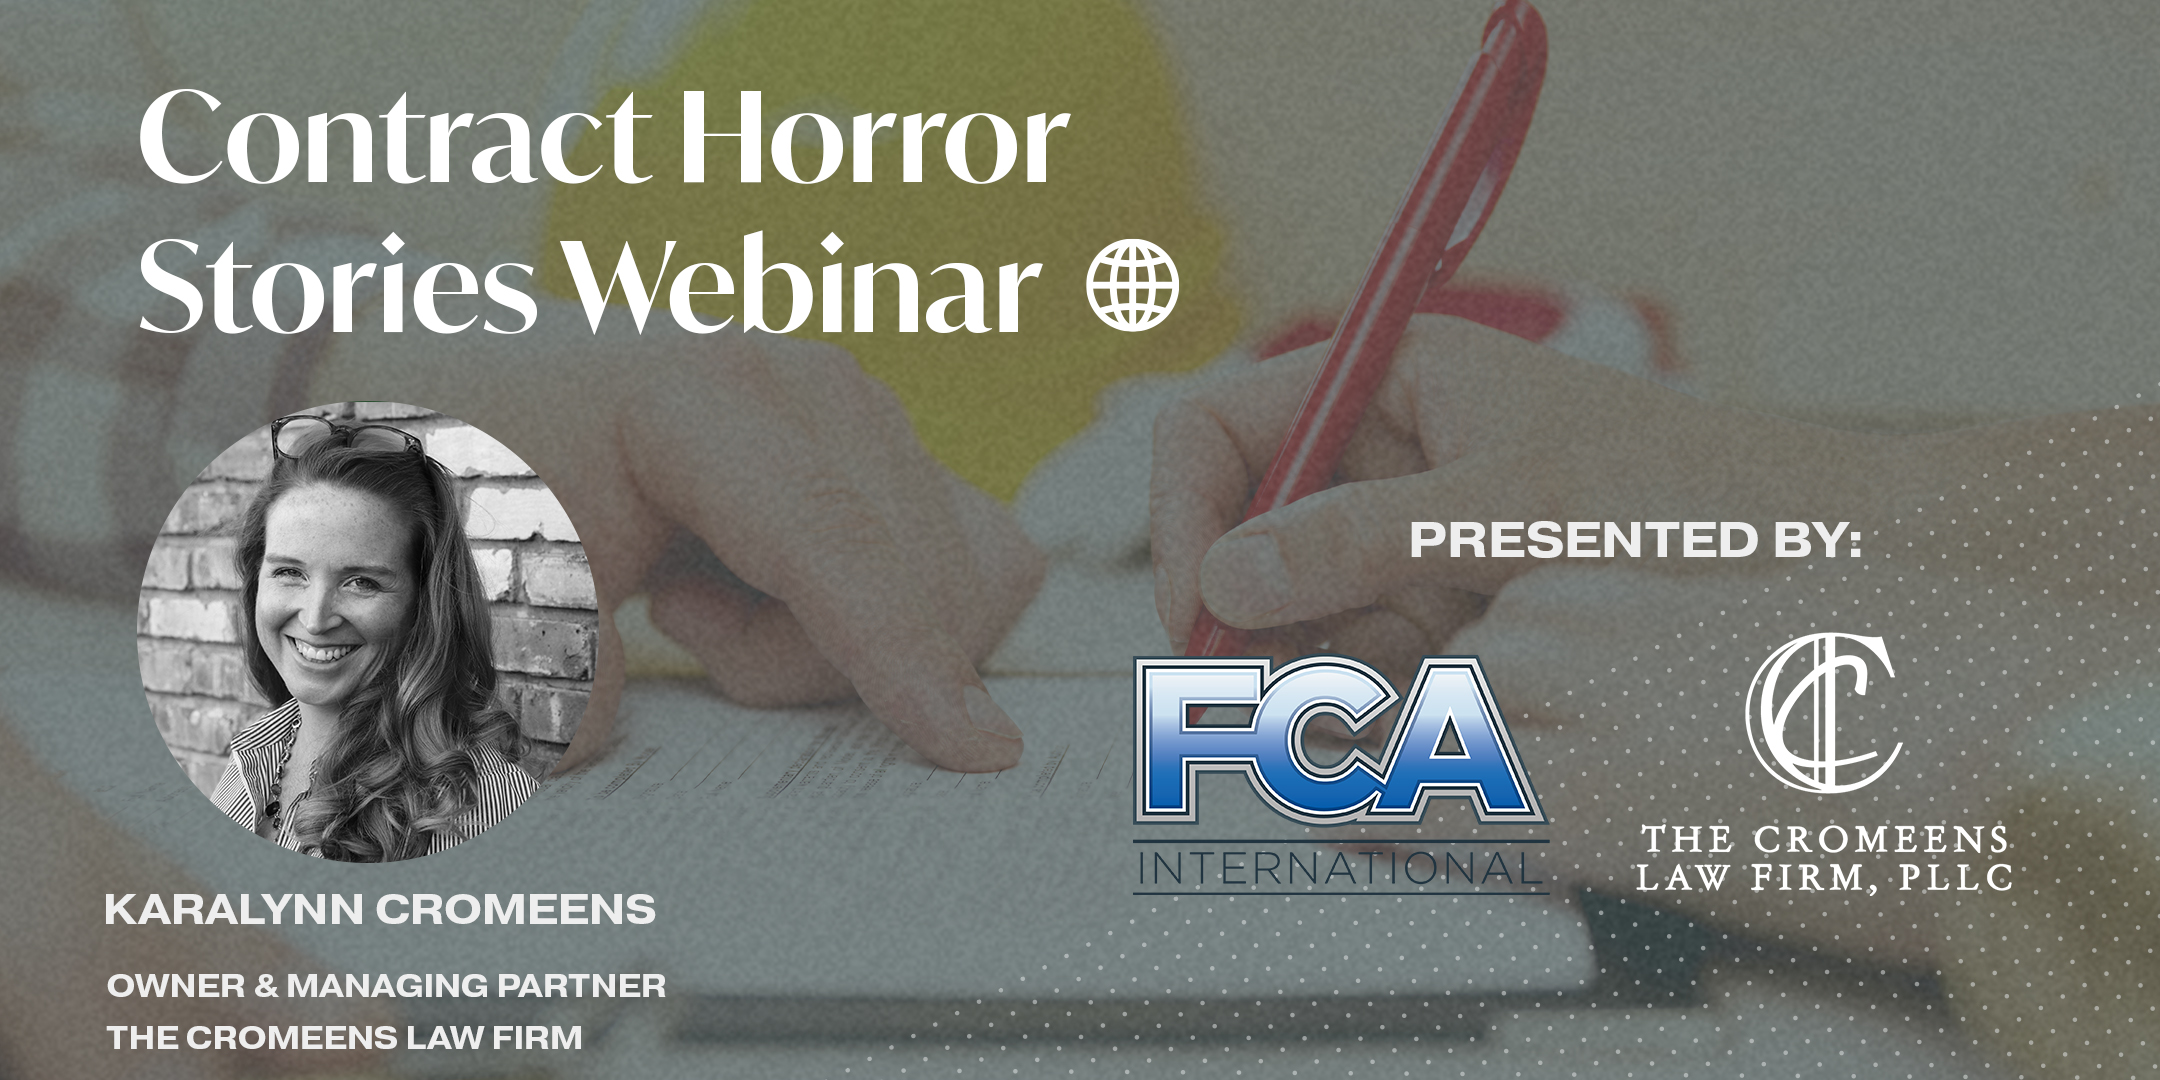 Contract Horror Stories Webinar with FCA